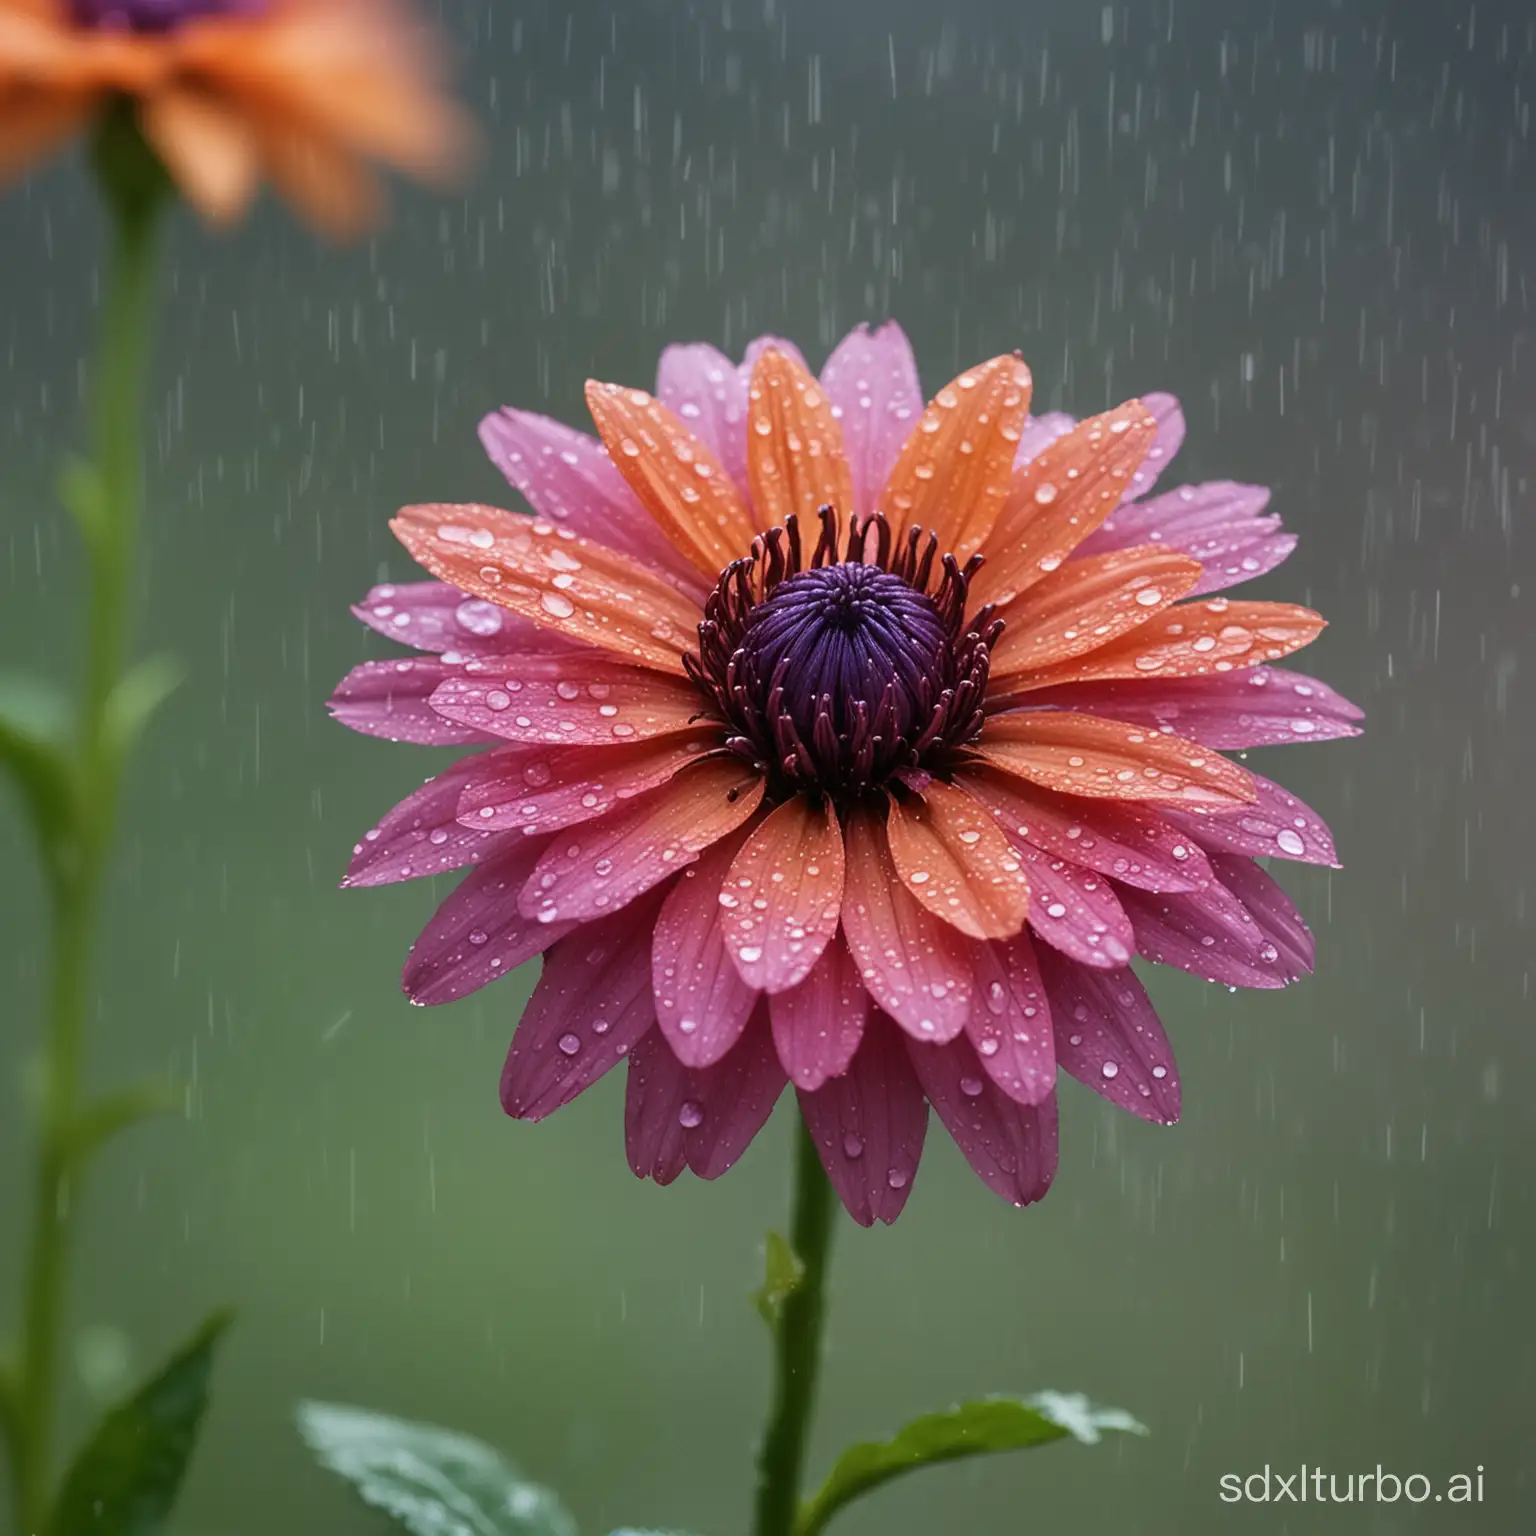 Vibrant-SevenColor-Flower-in-Rain-with-Blurred-Background